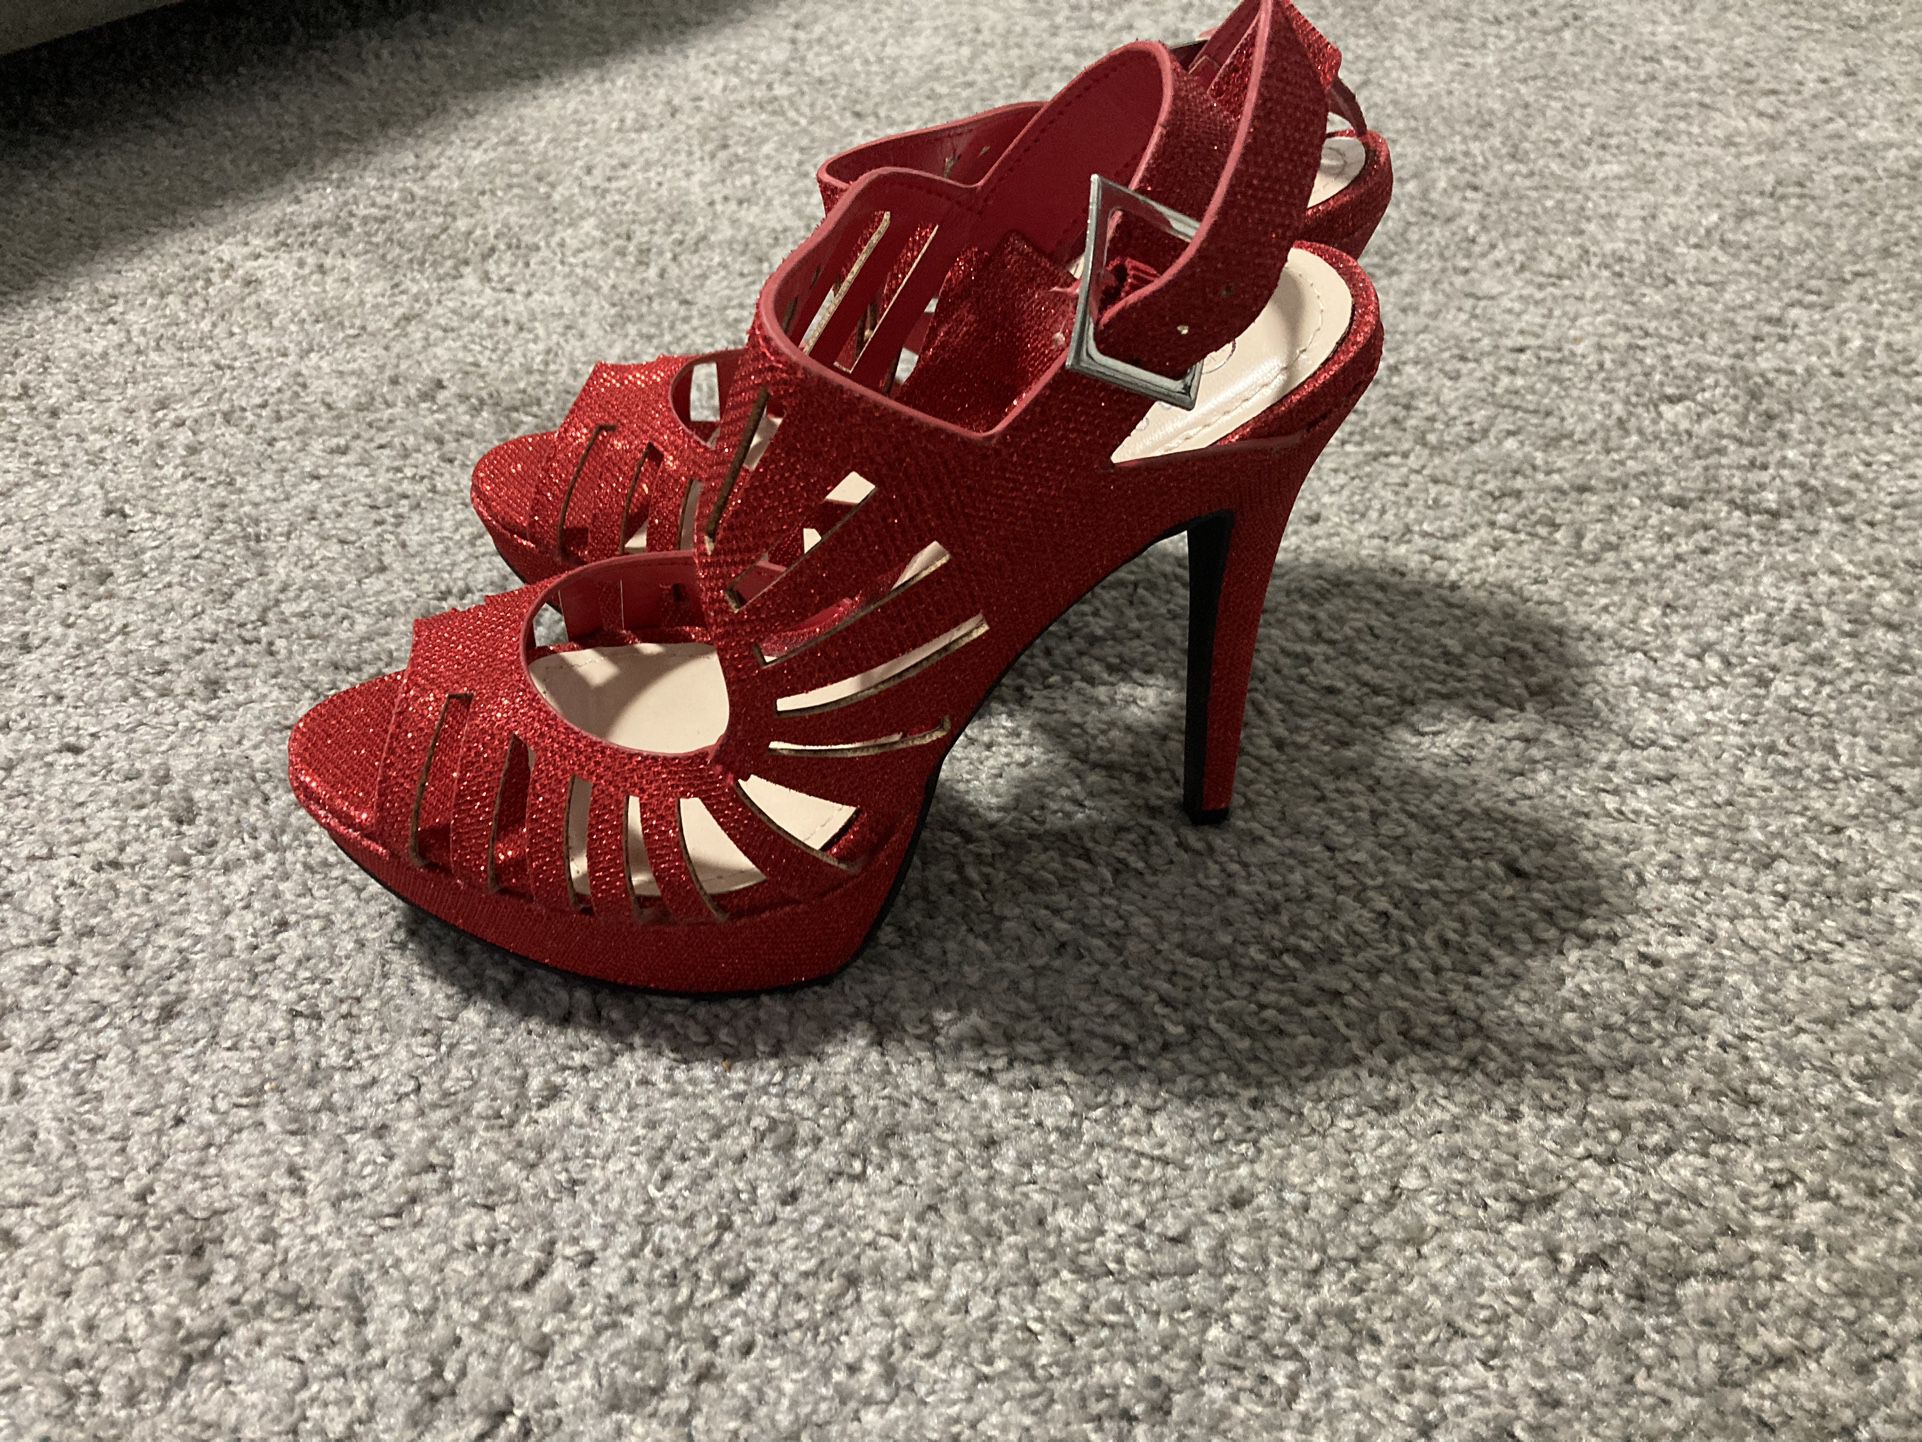 2 Pairs Of Red Heels Size 8 And 8 1/2